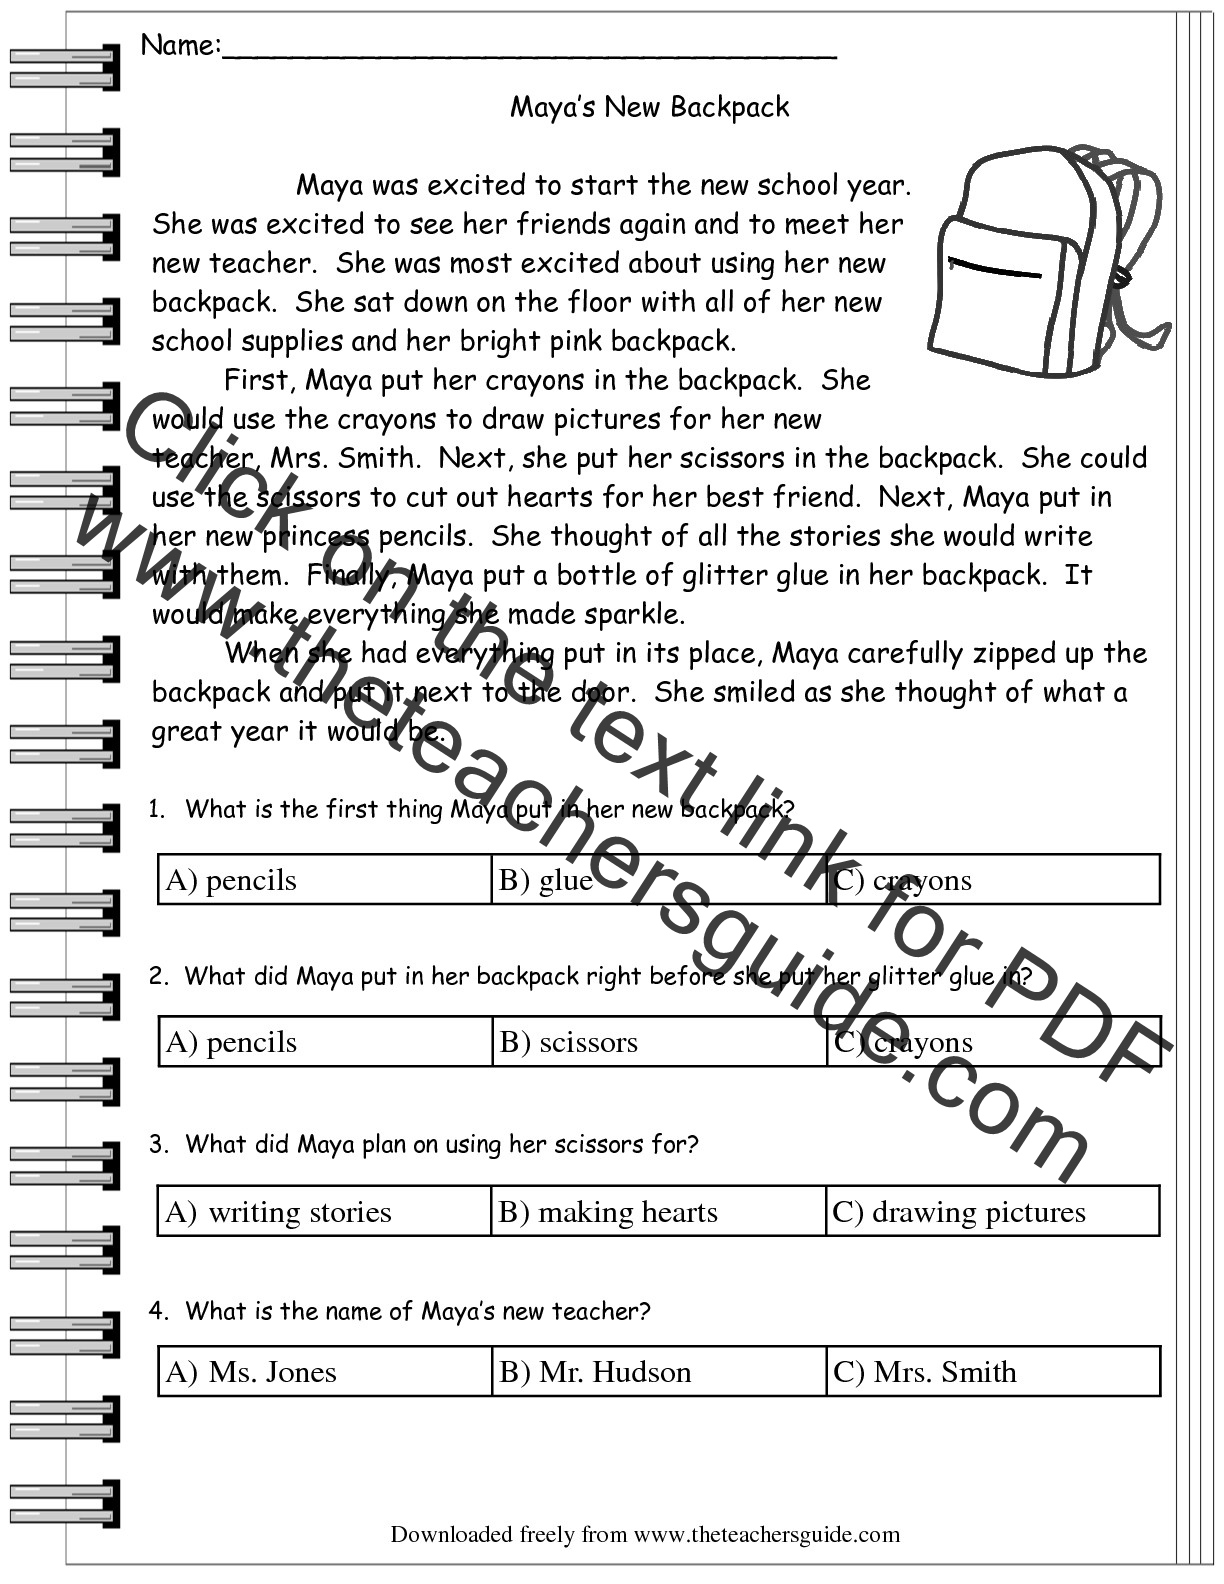 Reading Literature Comprehension Worksheets From The Teacher s Guide